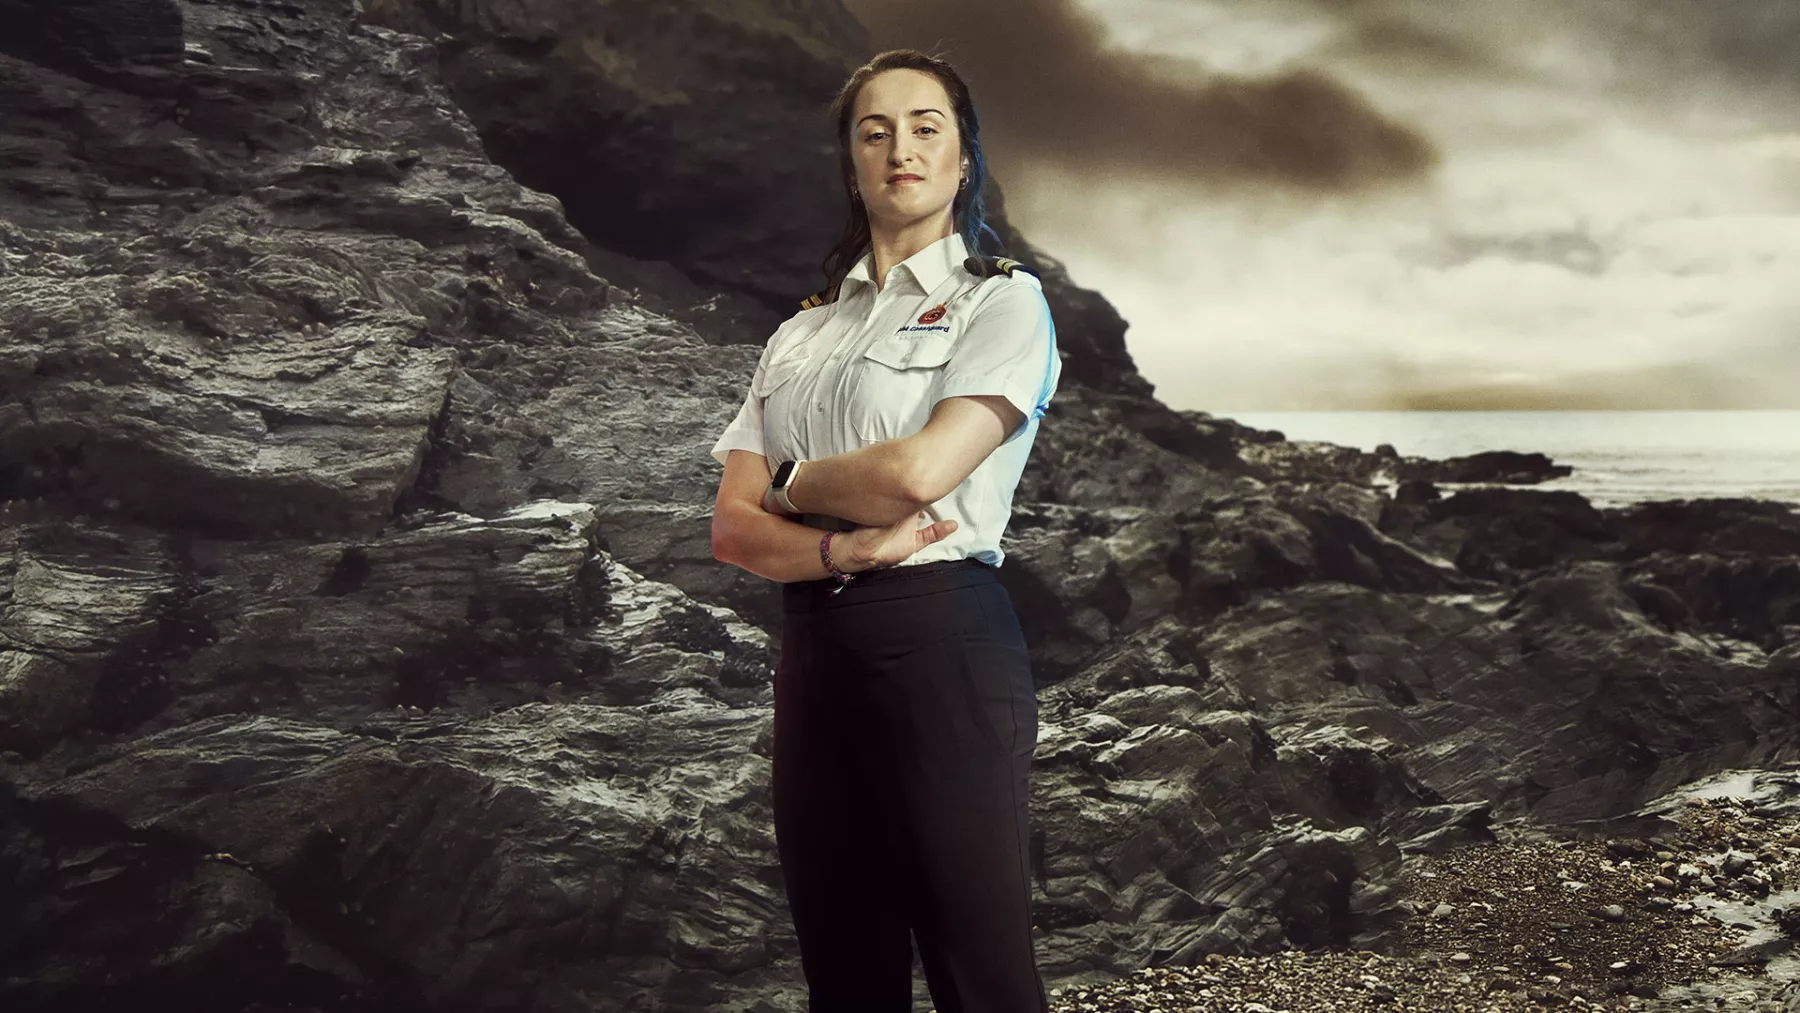 A female Coastguard officer stands with her ams folded on a grey, rocky landscape. She is wearing an official white shirt with the HM Coastguard logo and epaulettes.